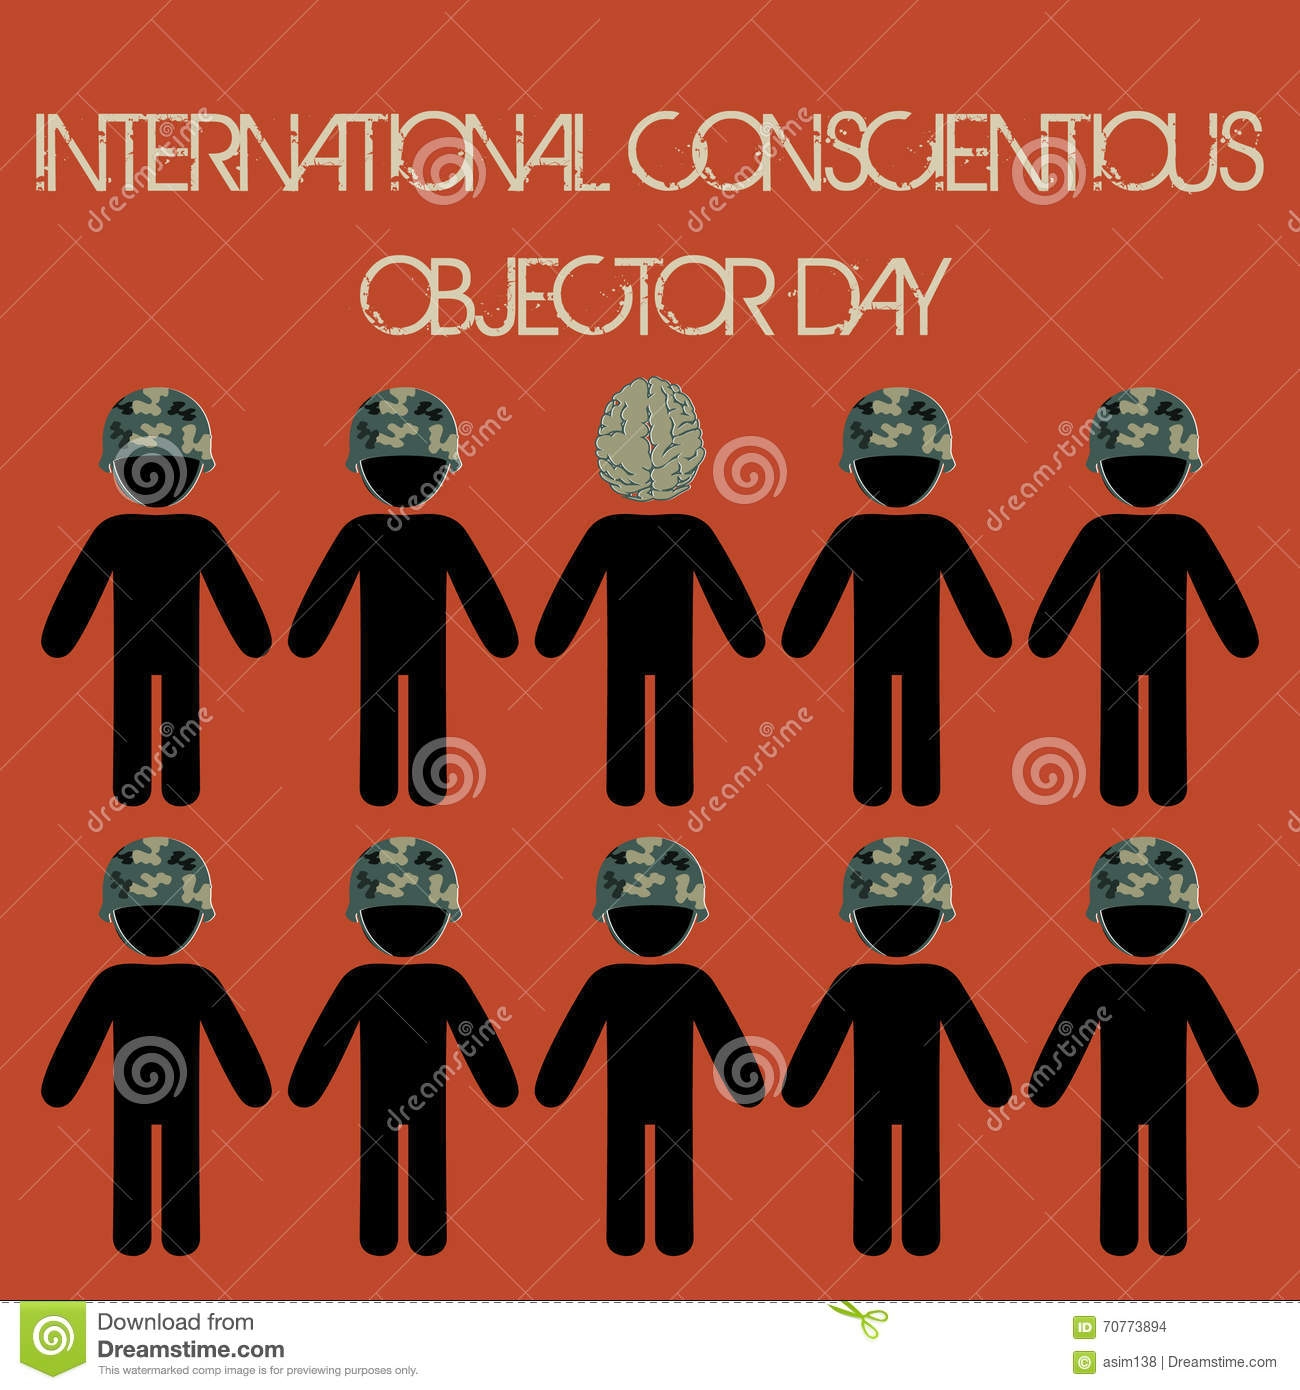 International Conscientious Objectors Day 2019